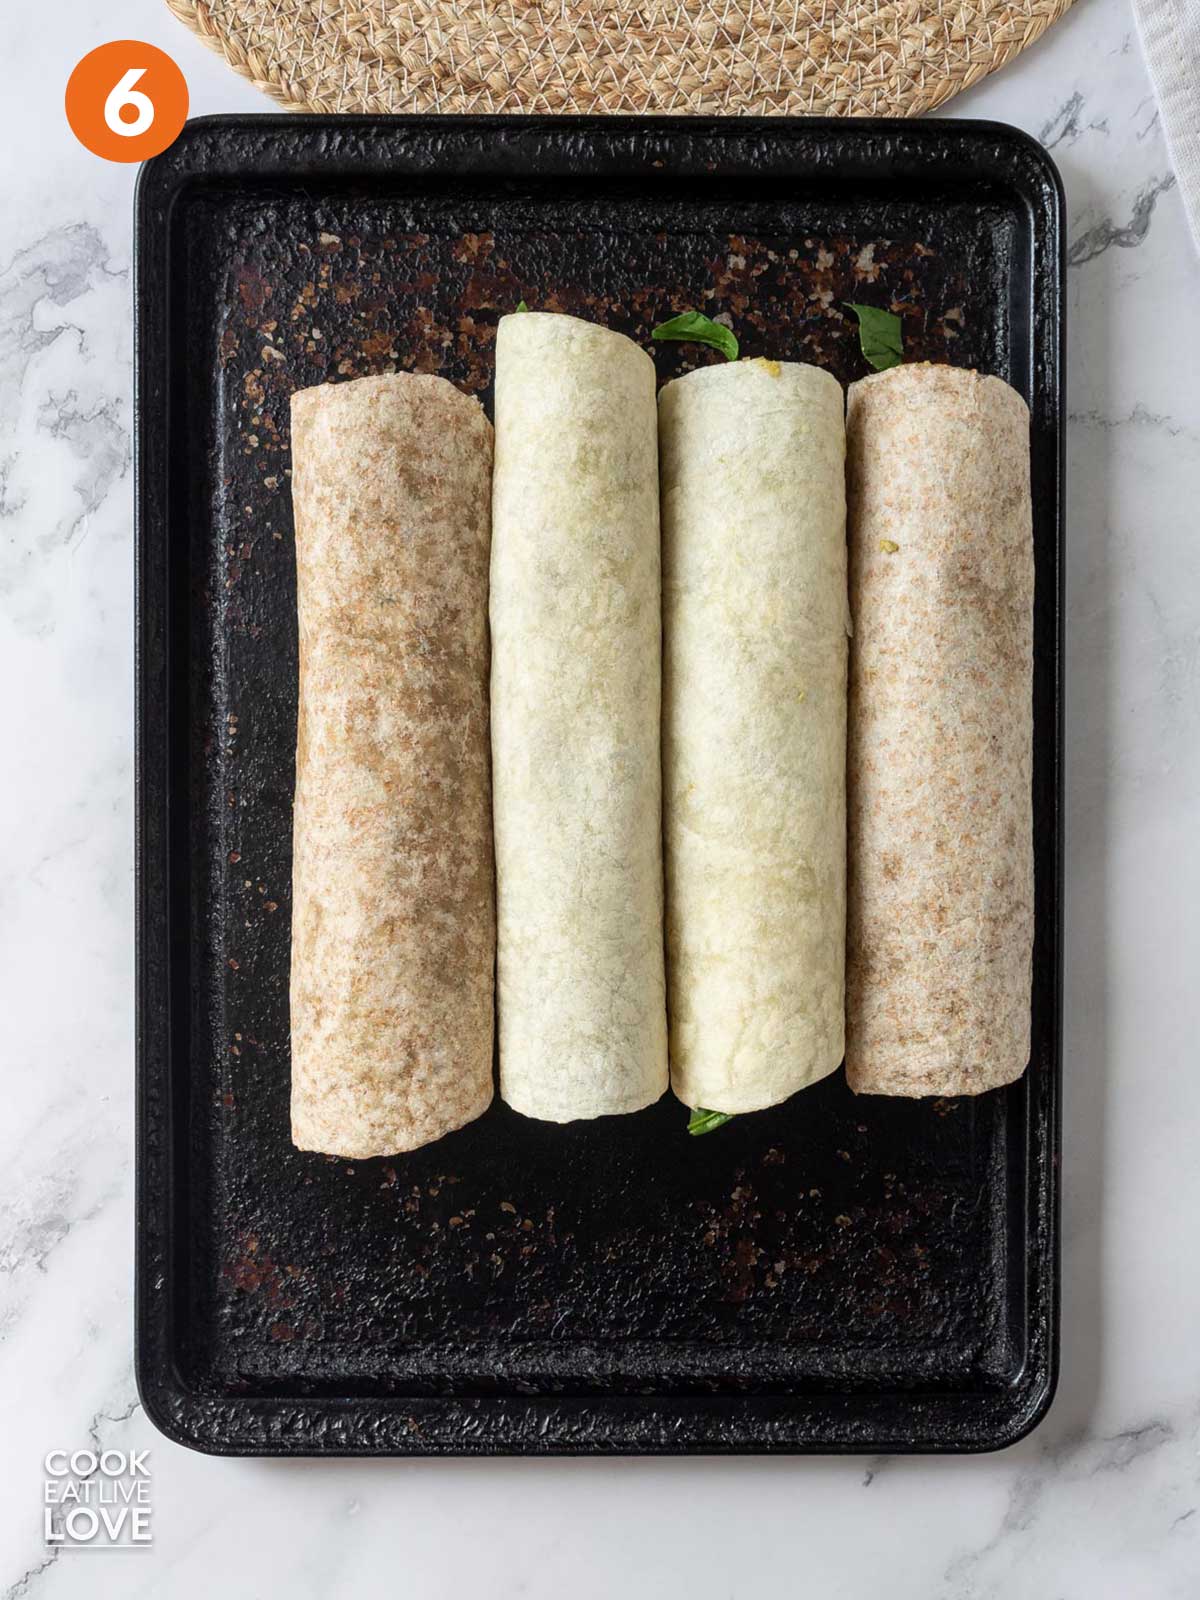 Rolled up flour tortillas are on a baking tray.